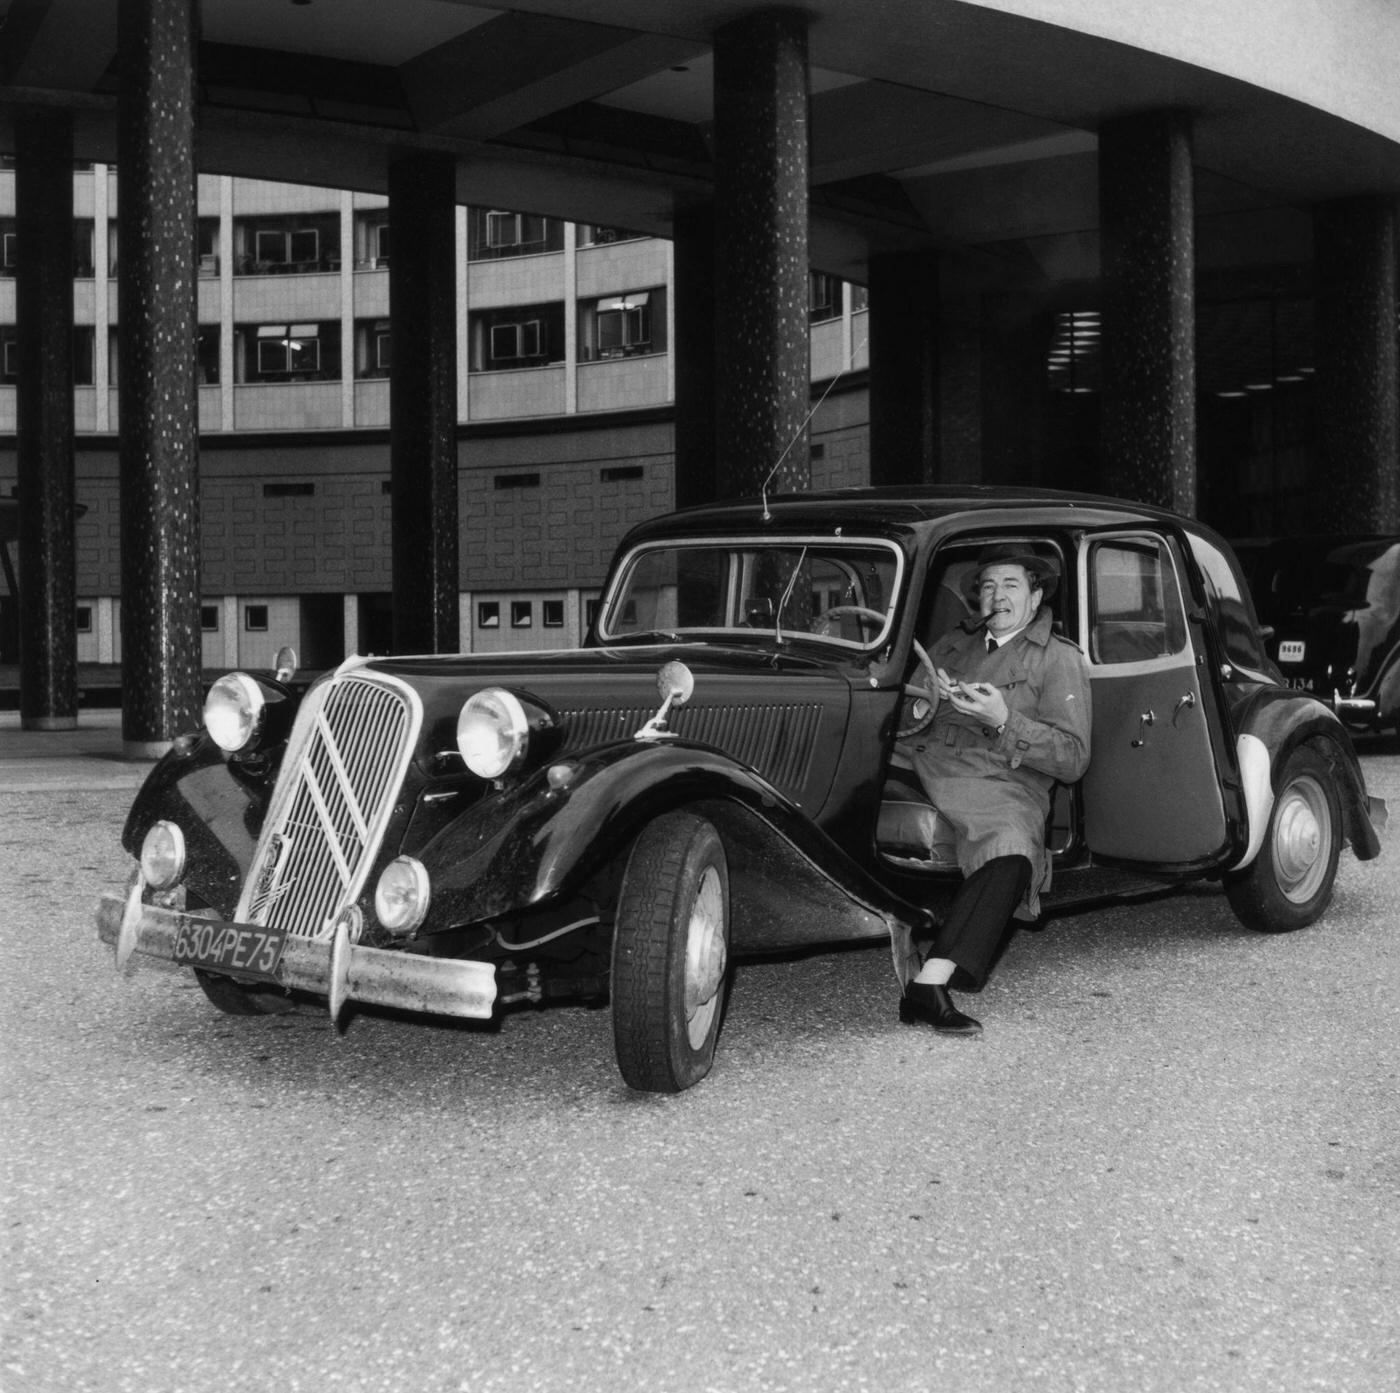 Rupert Davies, who played Inspector Maigret, with the Citroën Traction Avant car used in the television series, 1963.